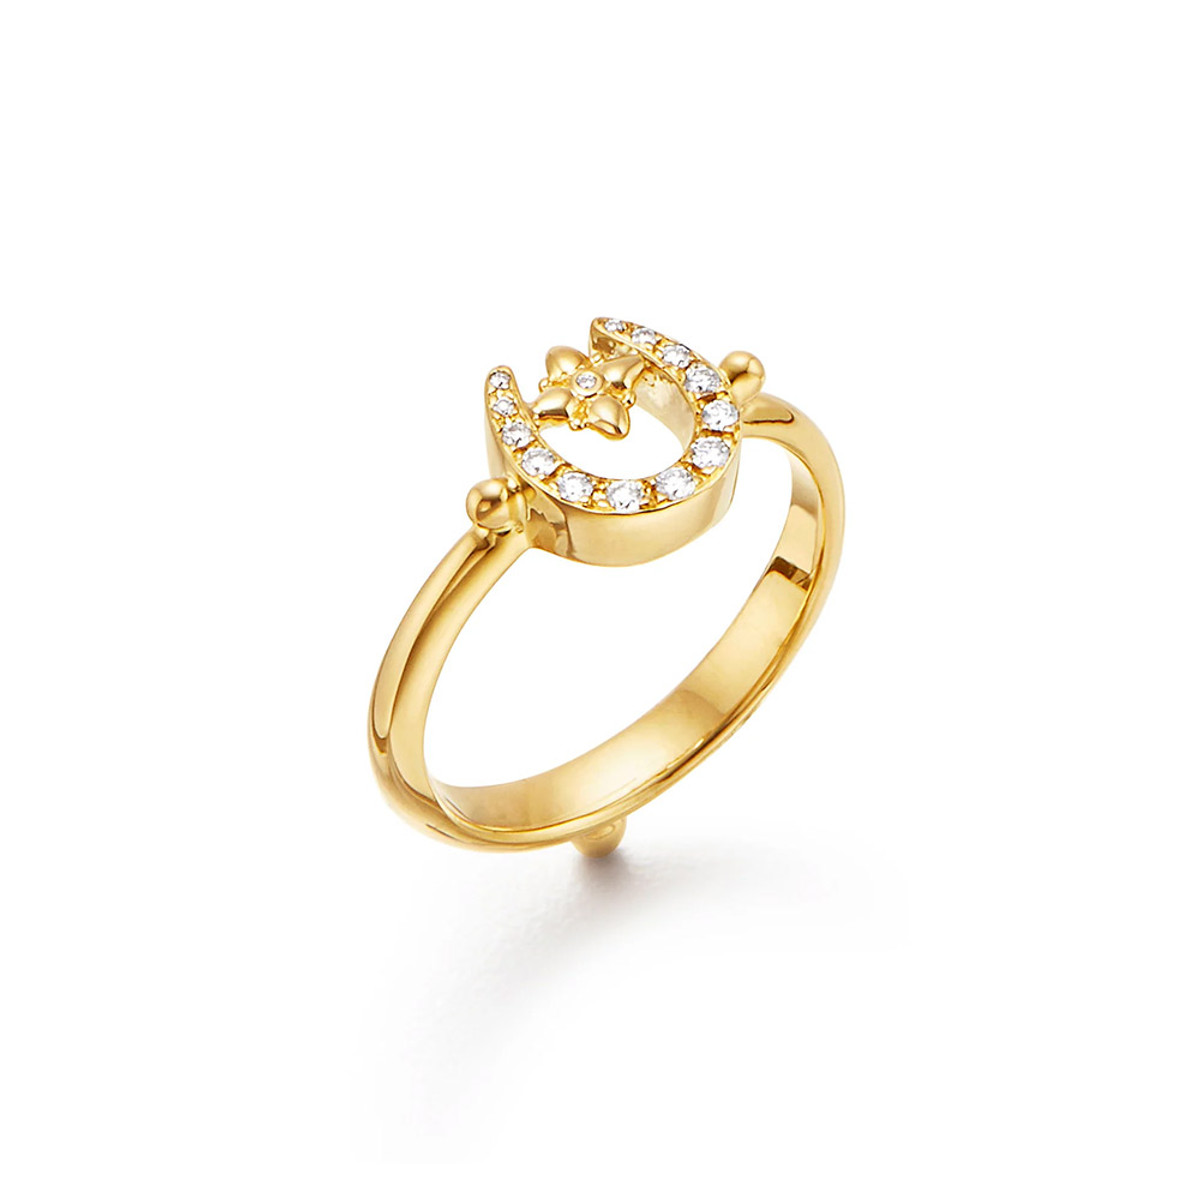 Temple St. Clair 18K Yellow Gold Diamond Horseshoe Ring-52084 Product Image